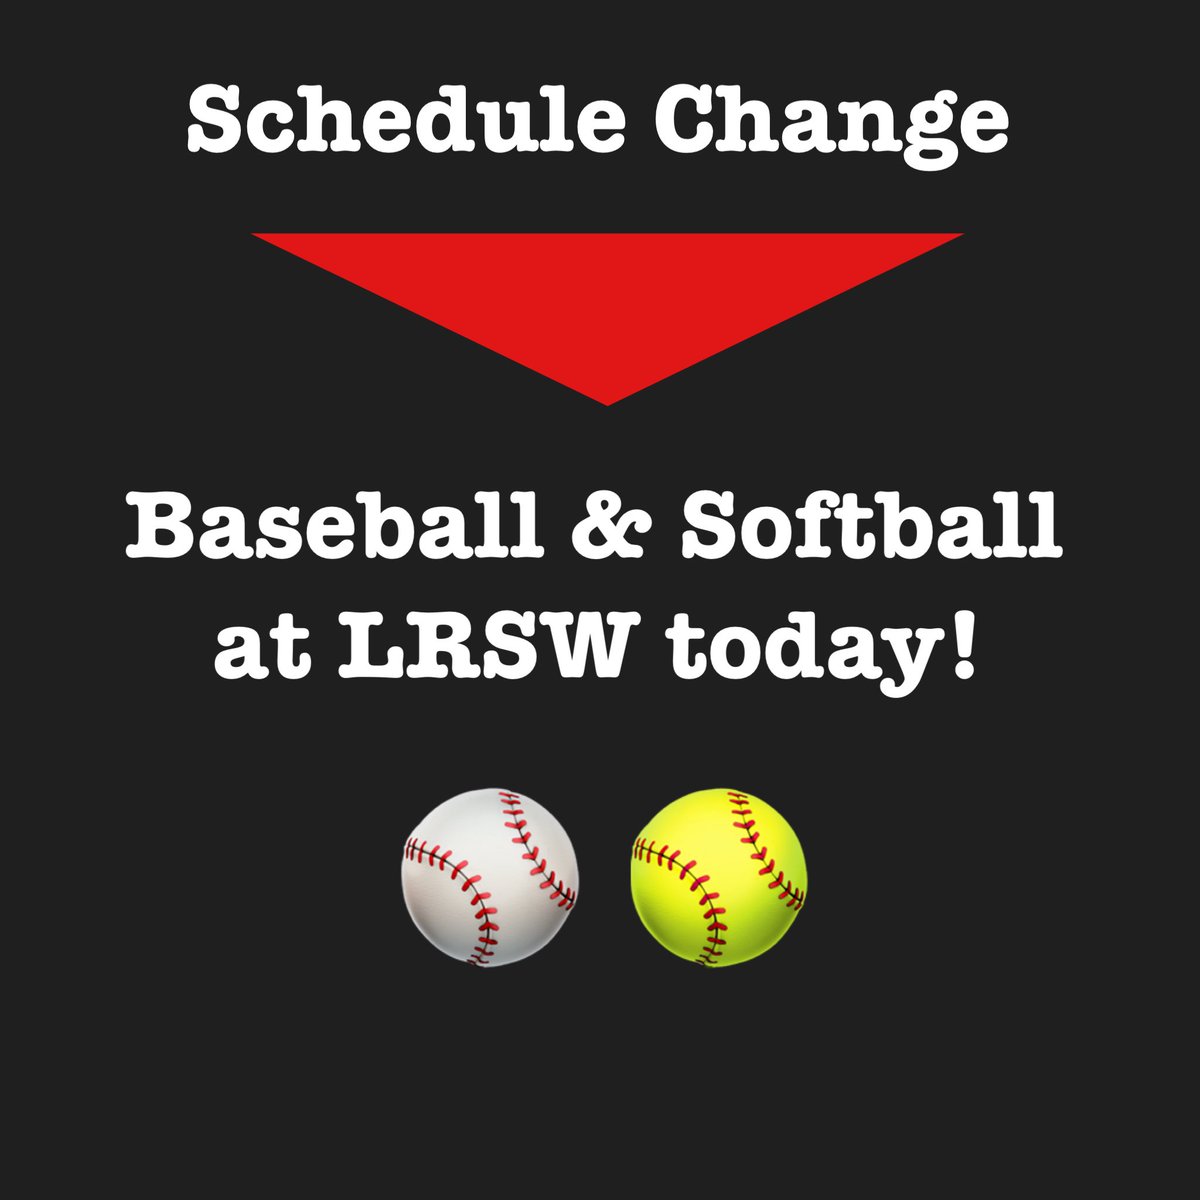 Schedule change today!